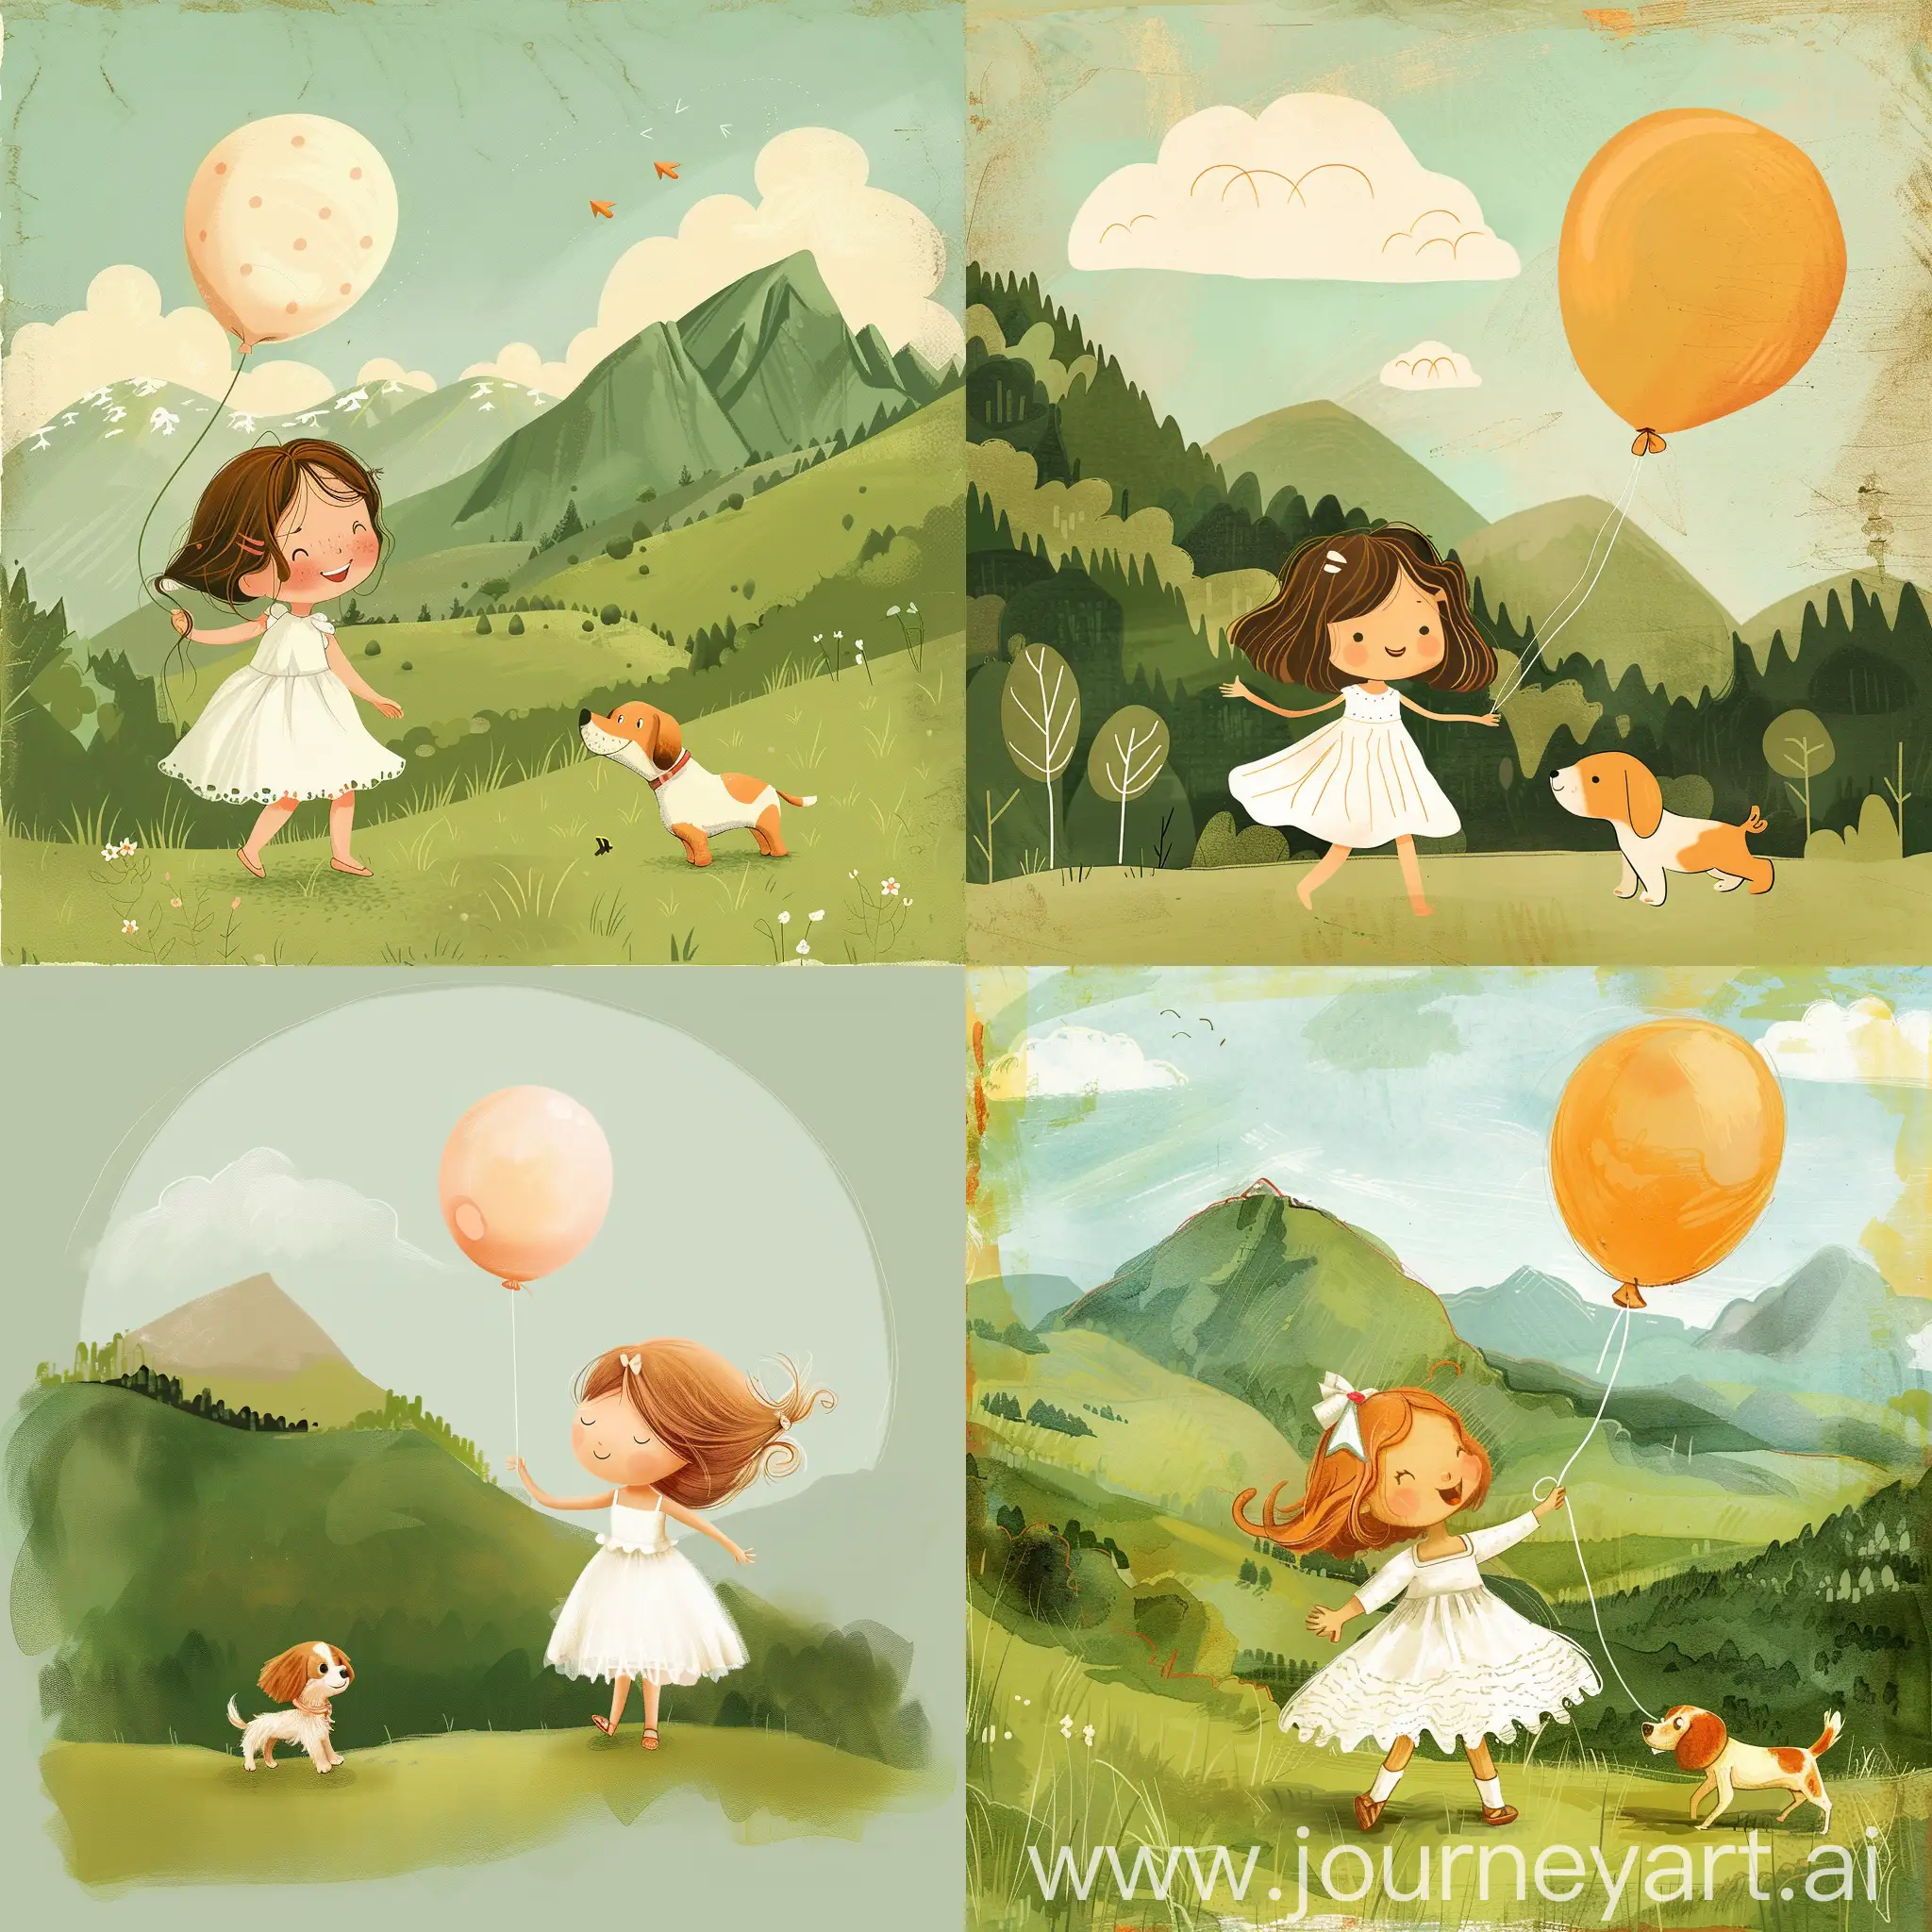 A little girl with a balloon, she wear white drees and with cute dog go to the green mountain, she very happy, smile
